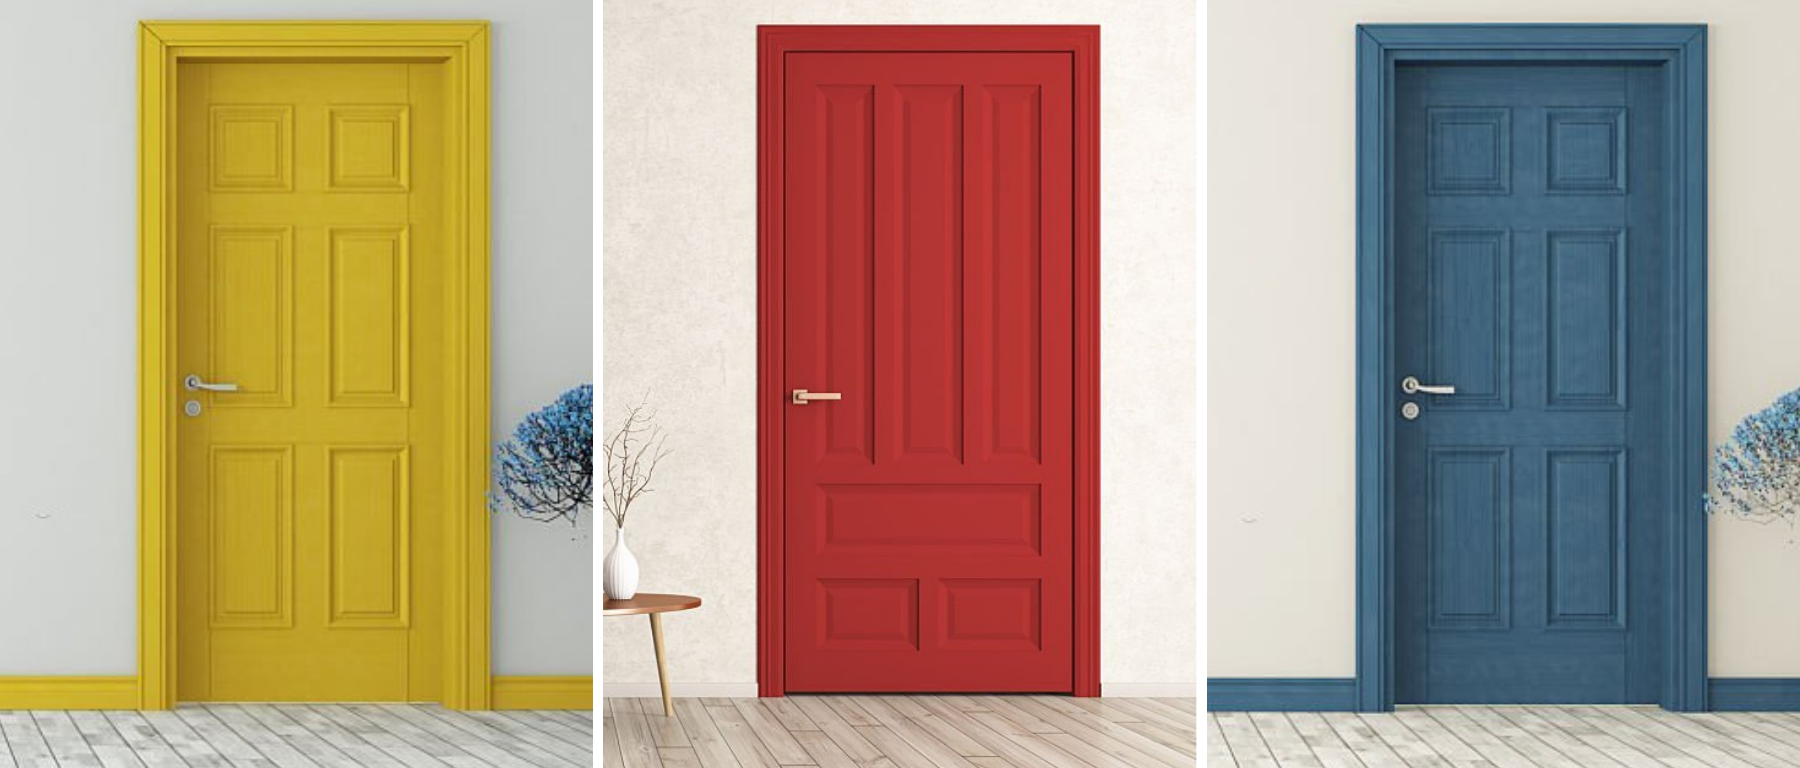 Buy Readymade Flush Doors at Best Price | Best Quality Wooden Flush Door Manufactures - Austin ply